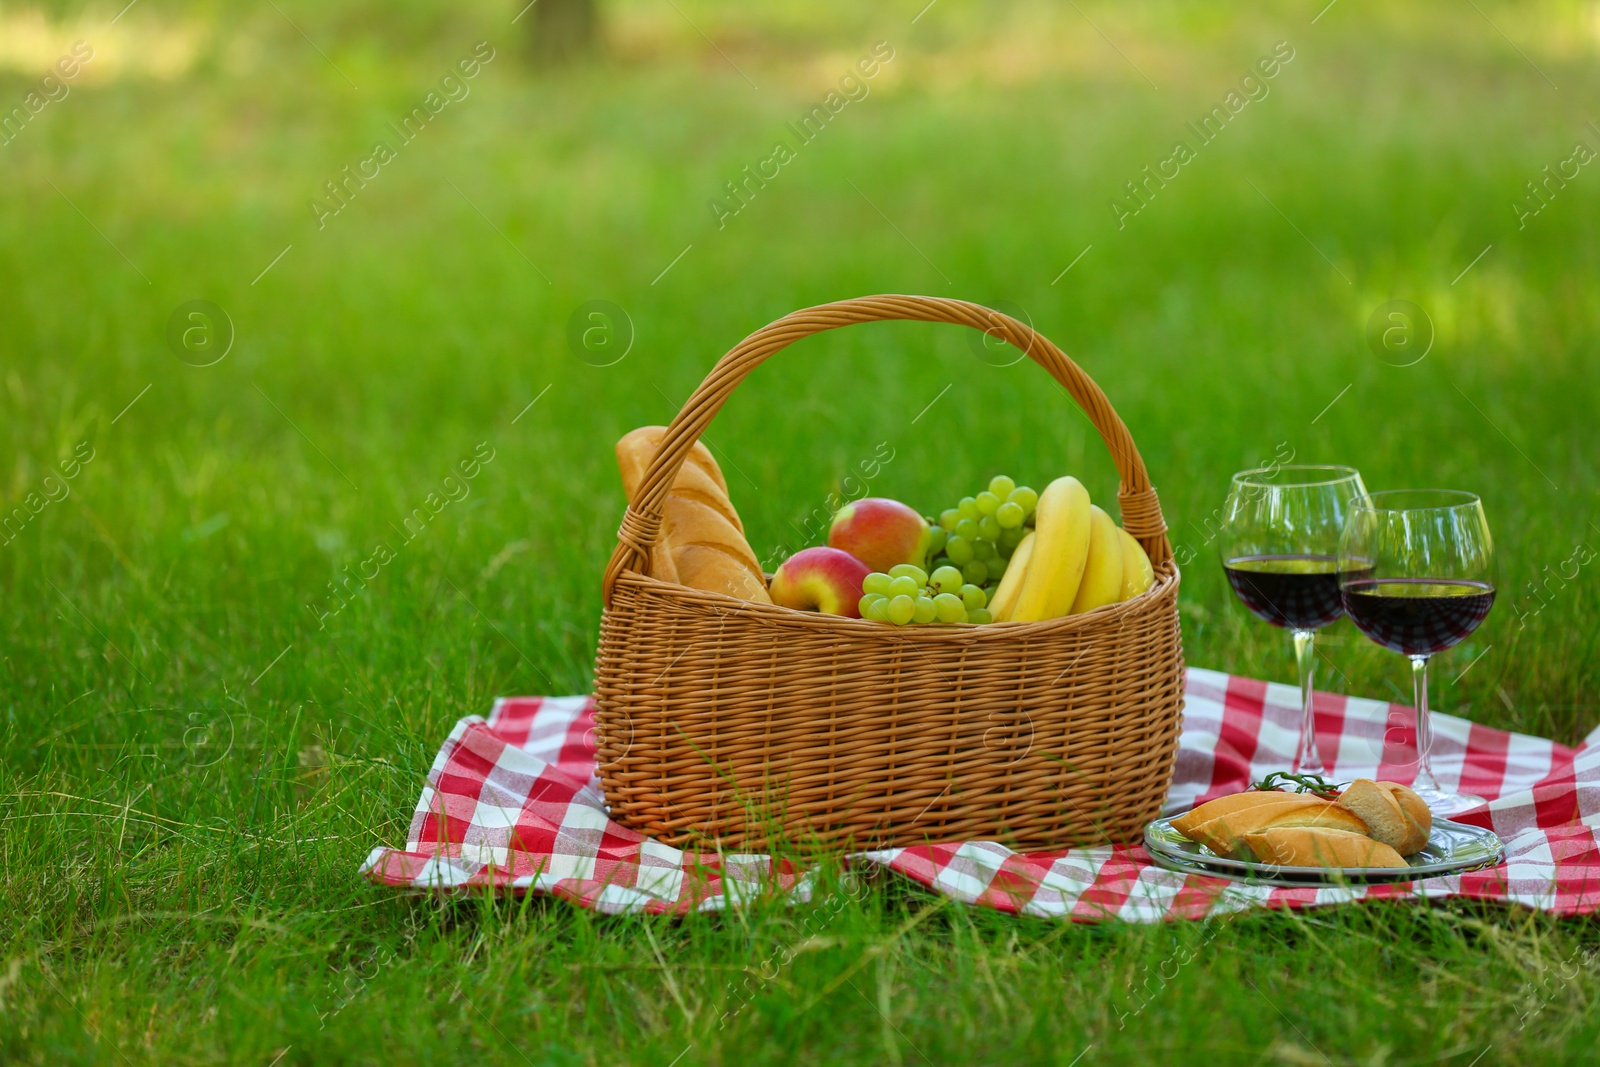 Photo of Wicker basket with food and wine on blanket in park, space for text. Summer picnic